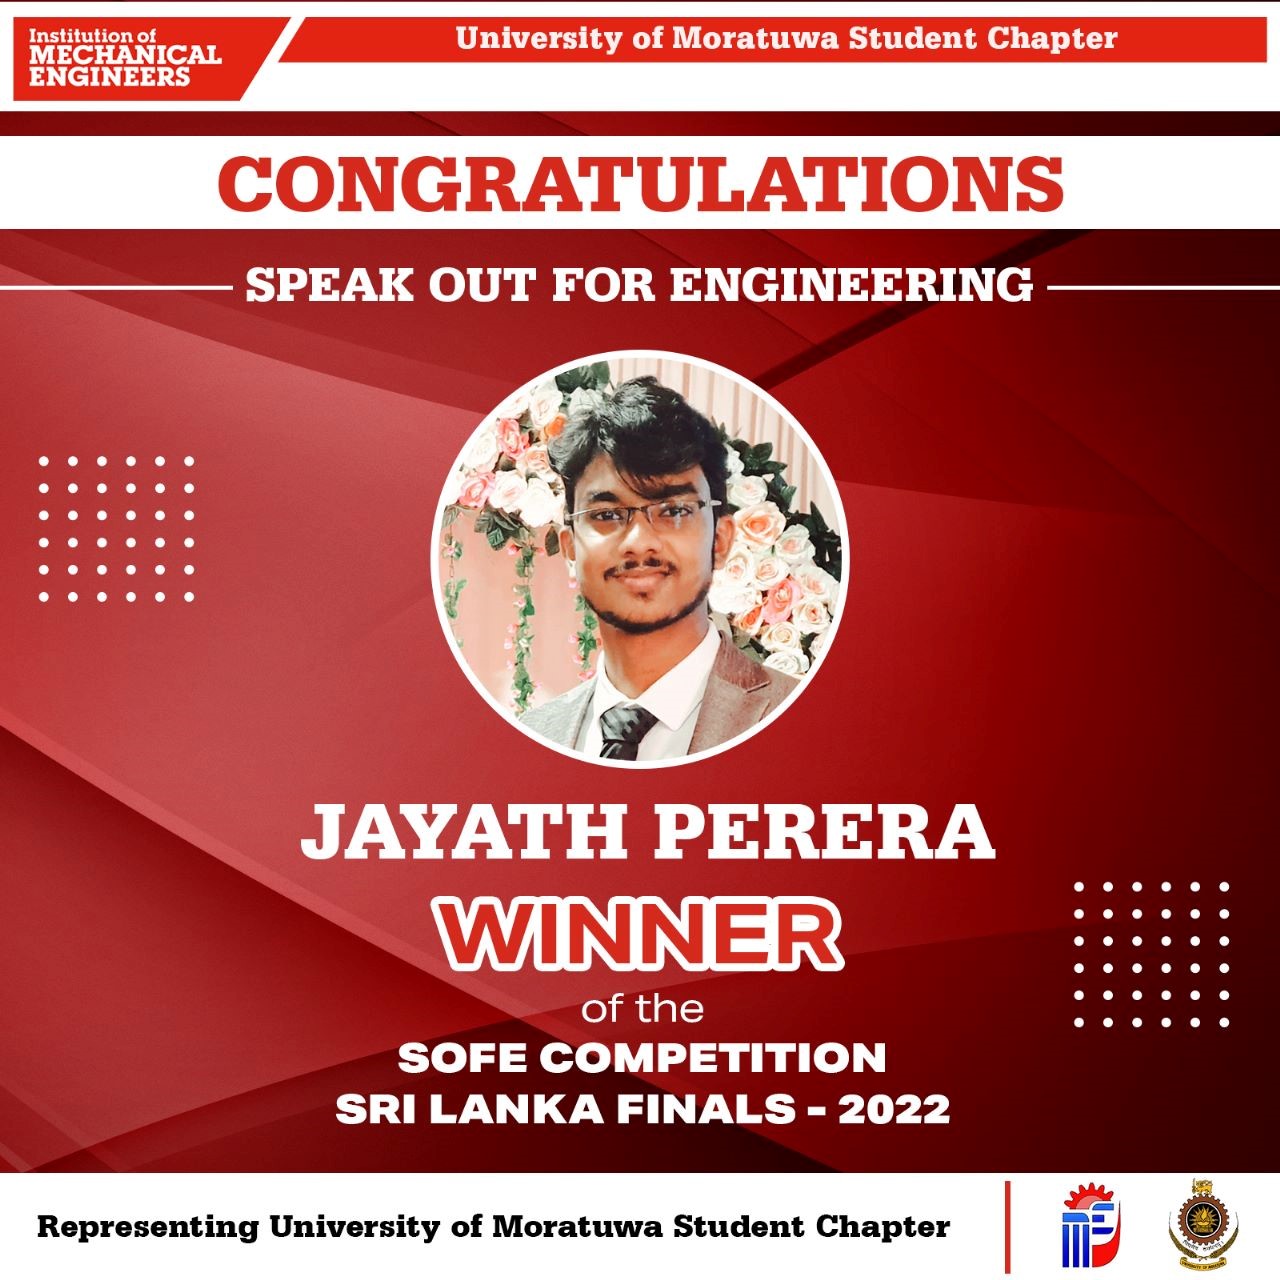 Jayath Perera becomes Sri Lanka Champion and Southern Asia Region Runner Up in IMechE SOFE Competition 2022 